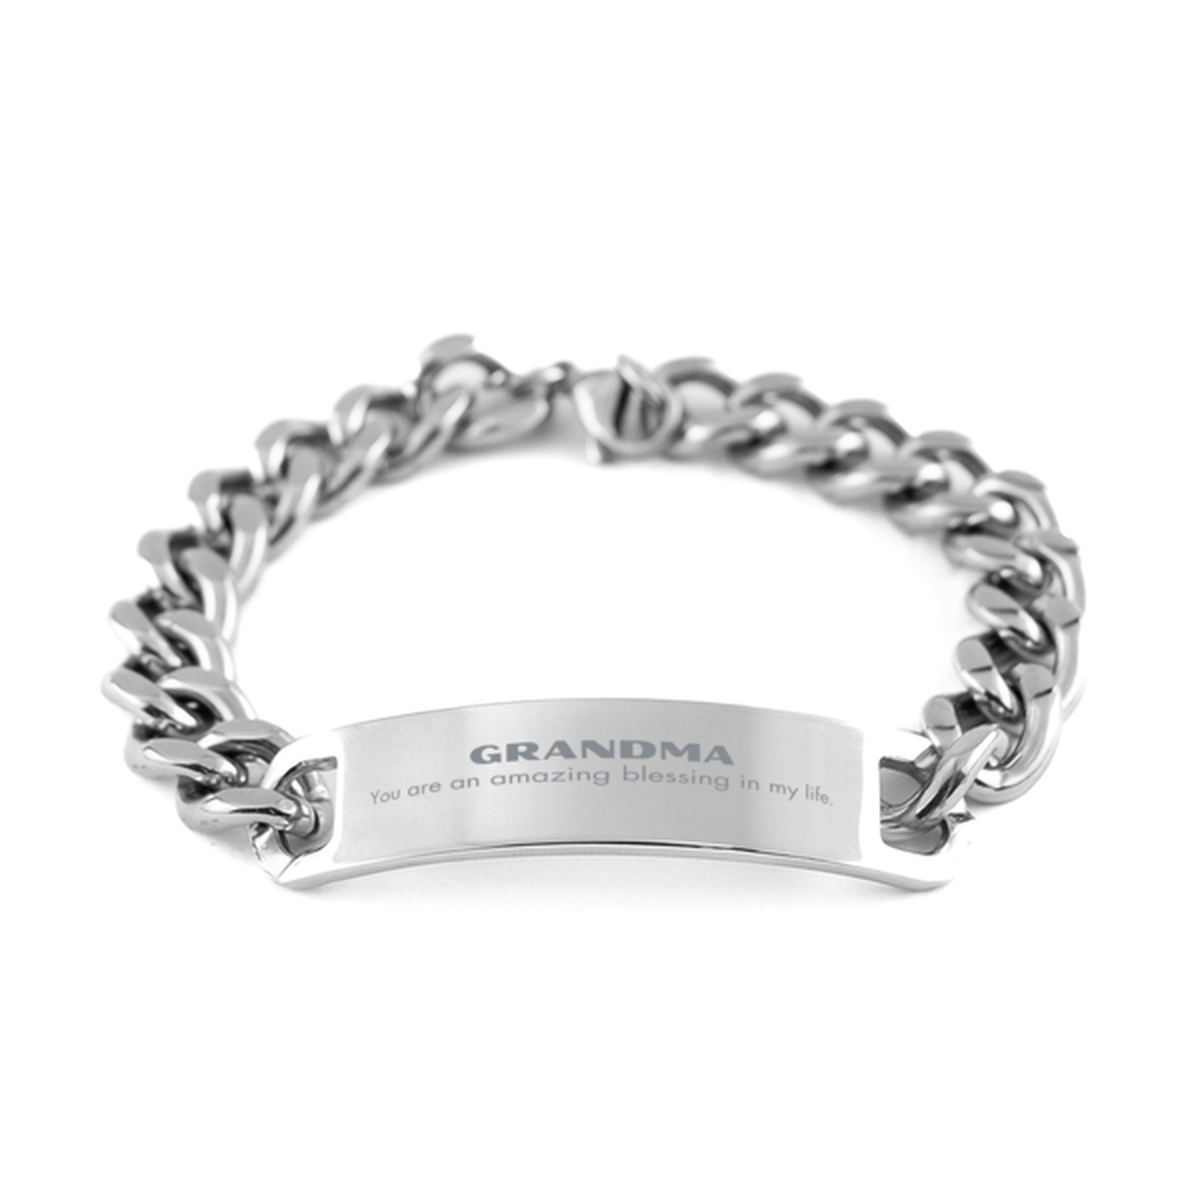 Grandma Cuban Chain Stainless Steel Bracelet, You are an amazing blessing in my life, Thank You Gifts For Grandma, Inspirational Birthday Christmas Unique Gifts For Grandma